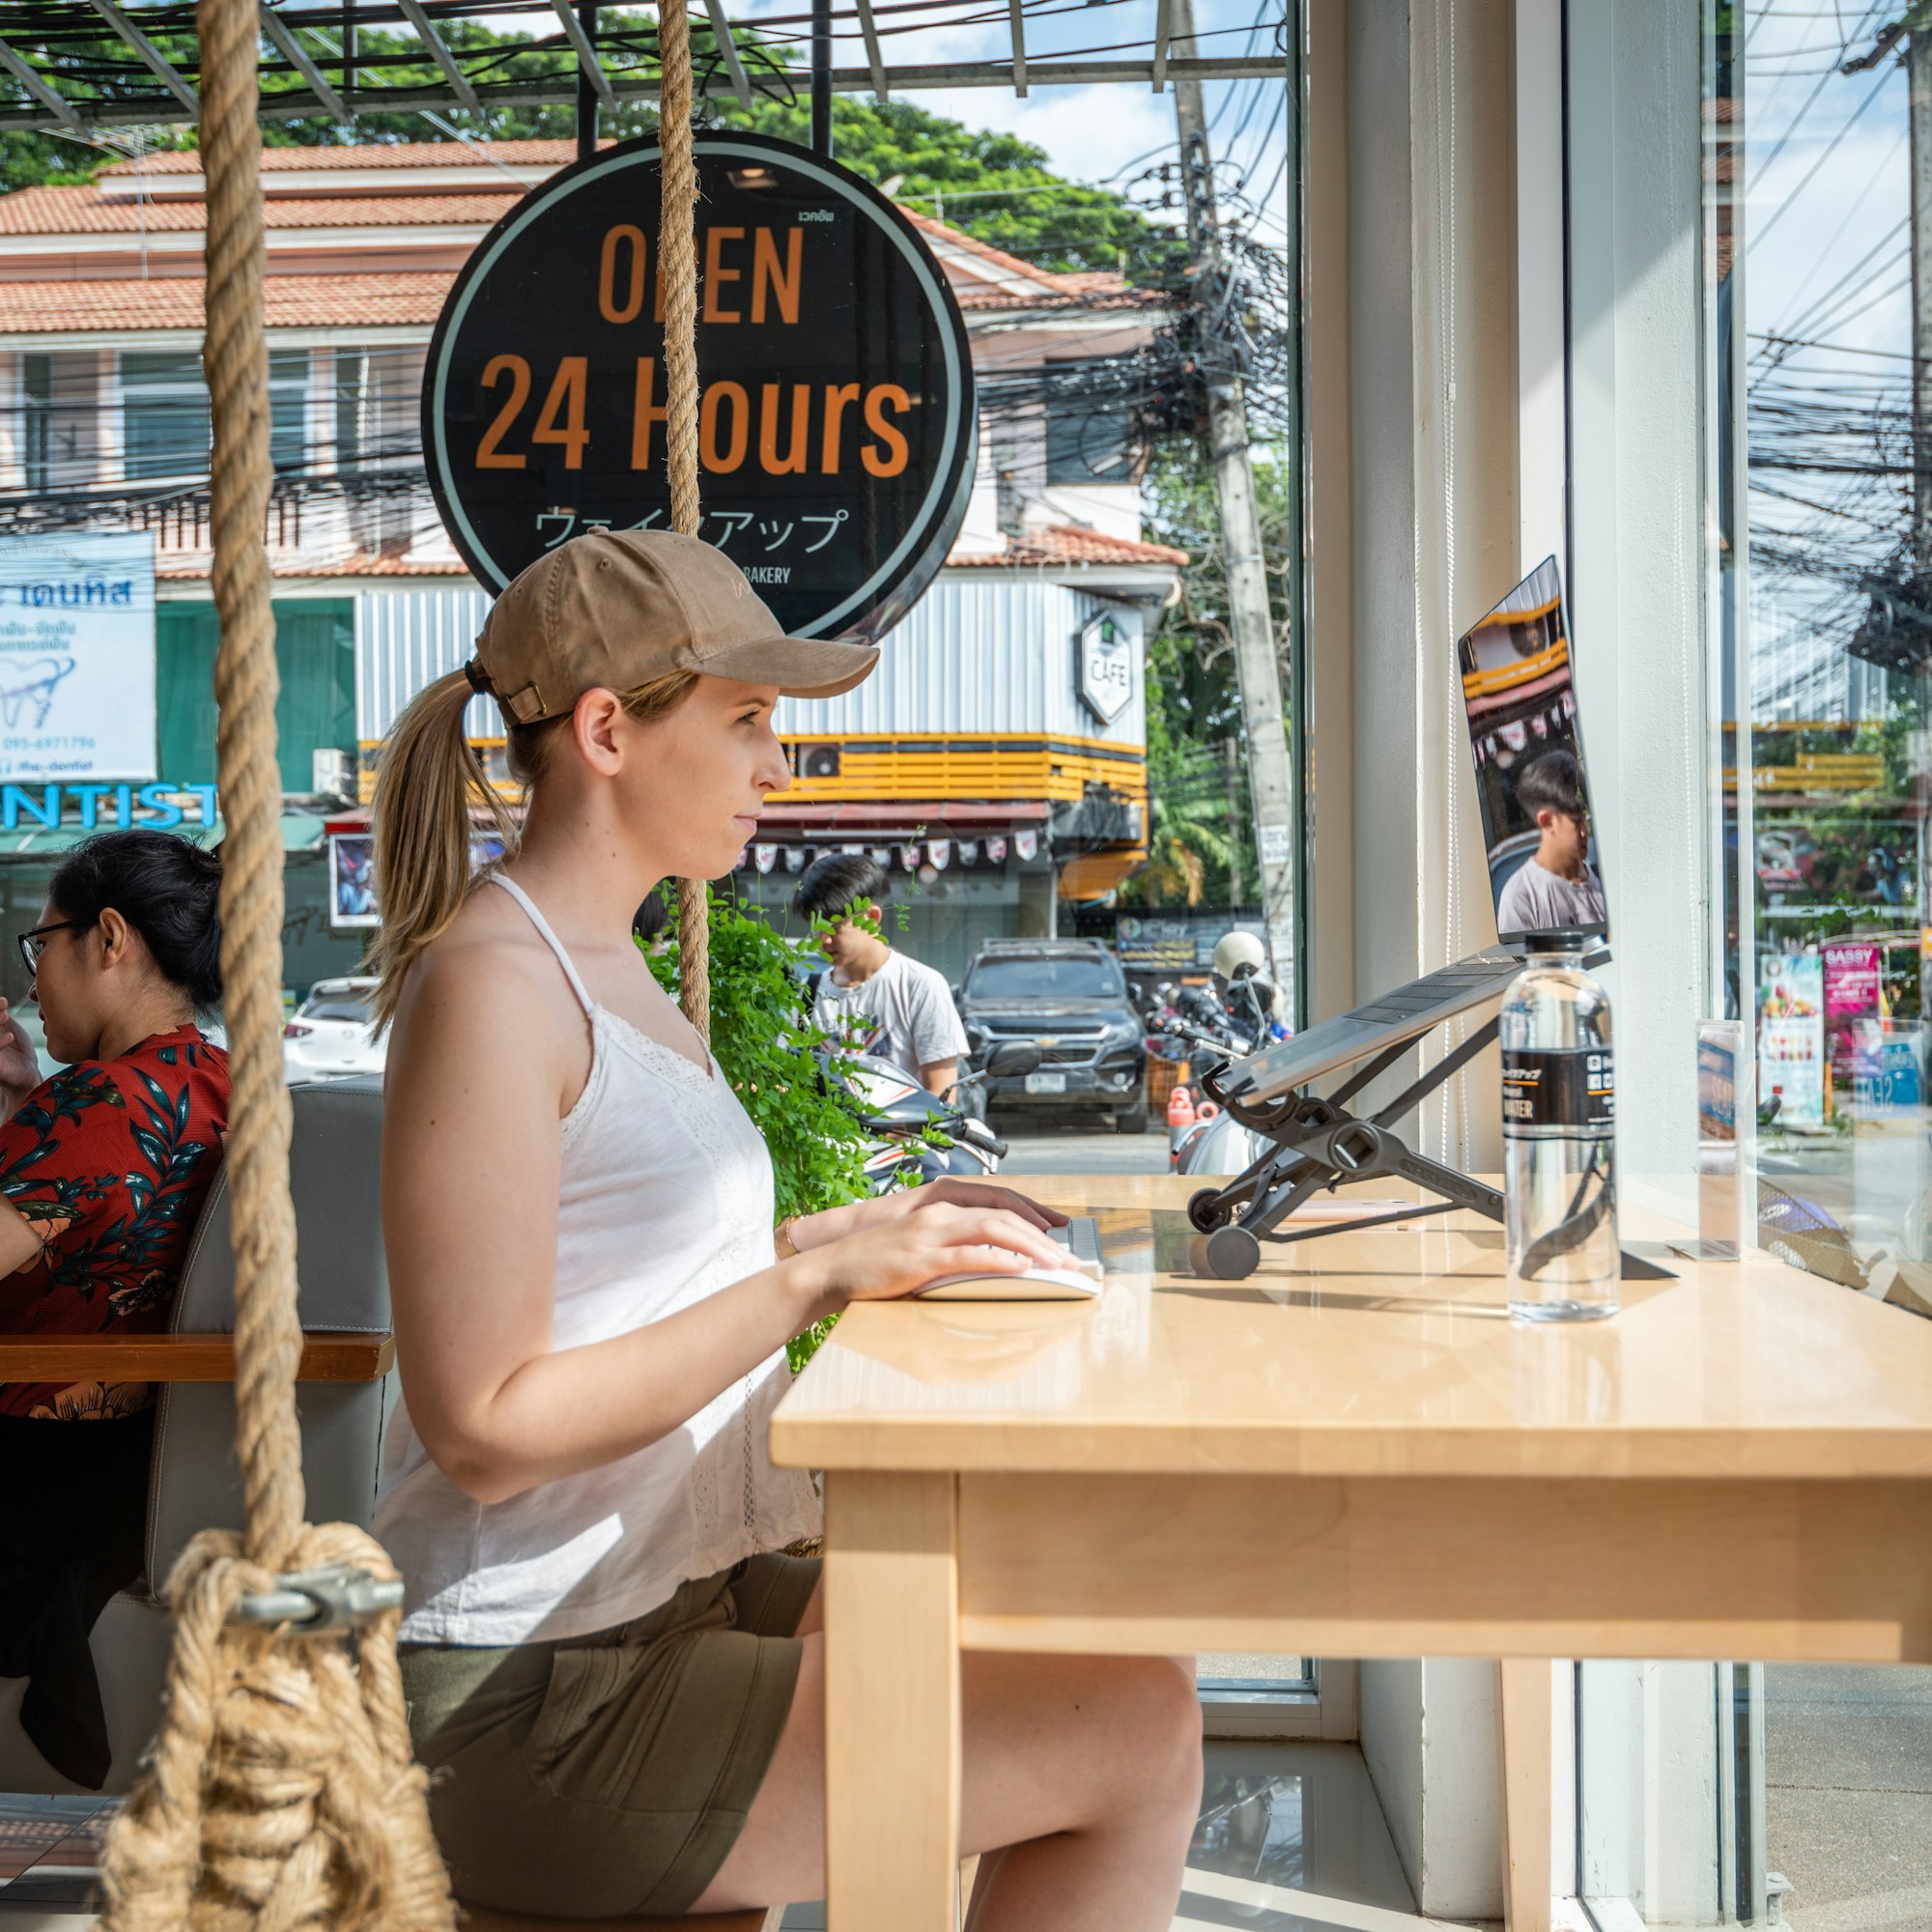 Digital nomad working from a laptop in a cafe 
Working from anywhere on a ergonomic laptop stand